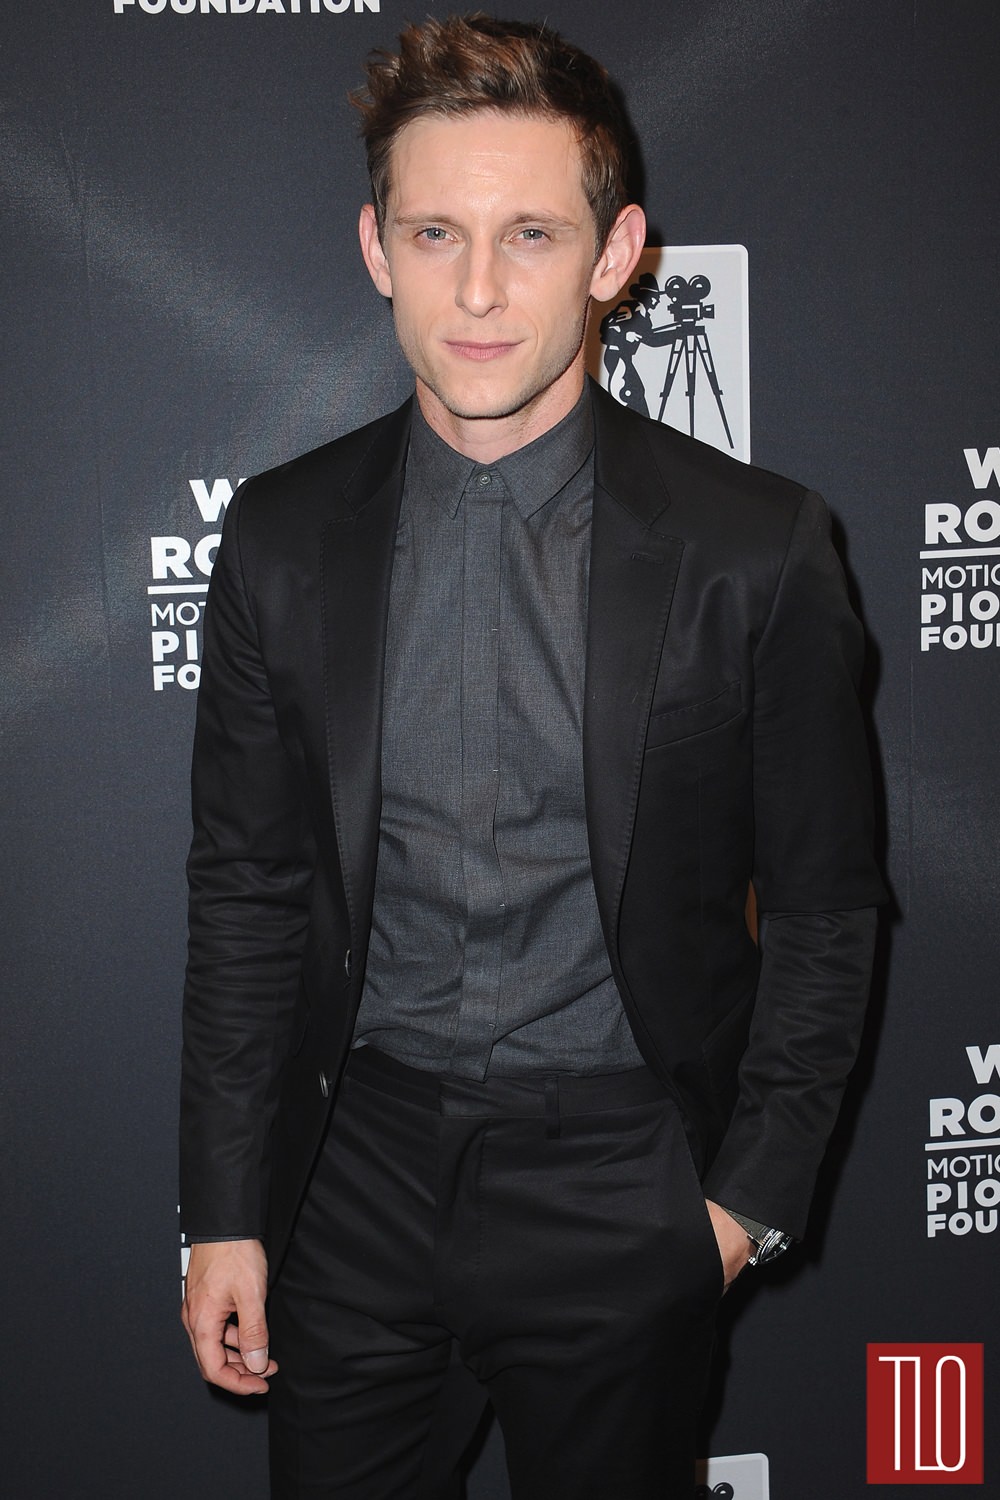 Jamie-Bell-2015-Will-Rogers-Pioneer-Year-Awards-Dinner-Red-Carpet-Fashion-Menswear-Tom-Lorenzo-Site-TLO (1)